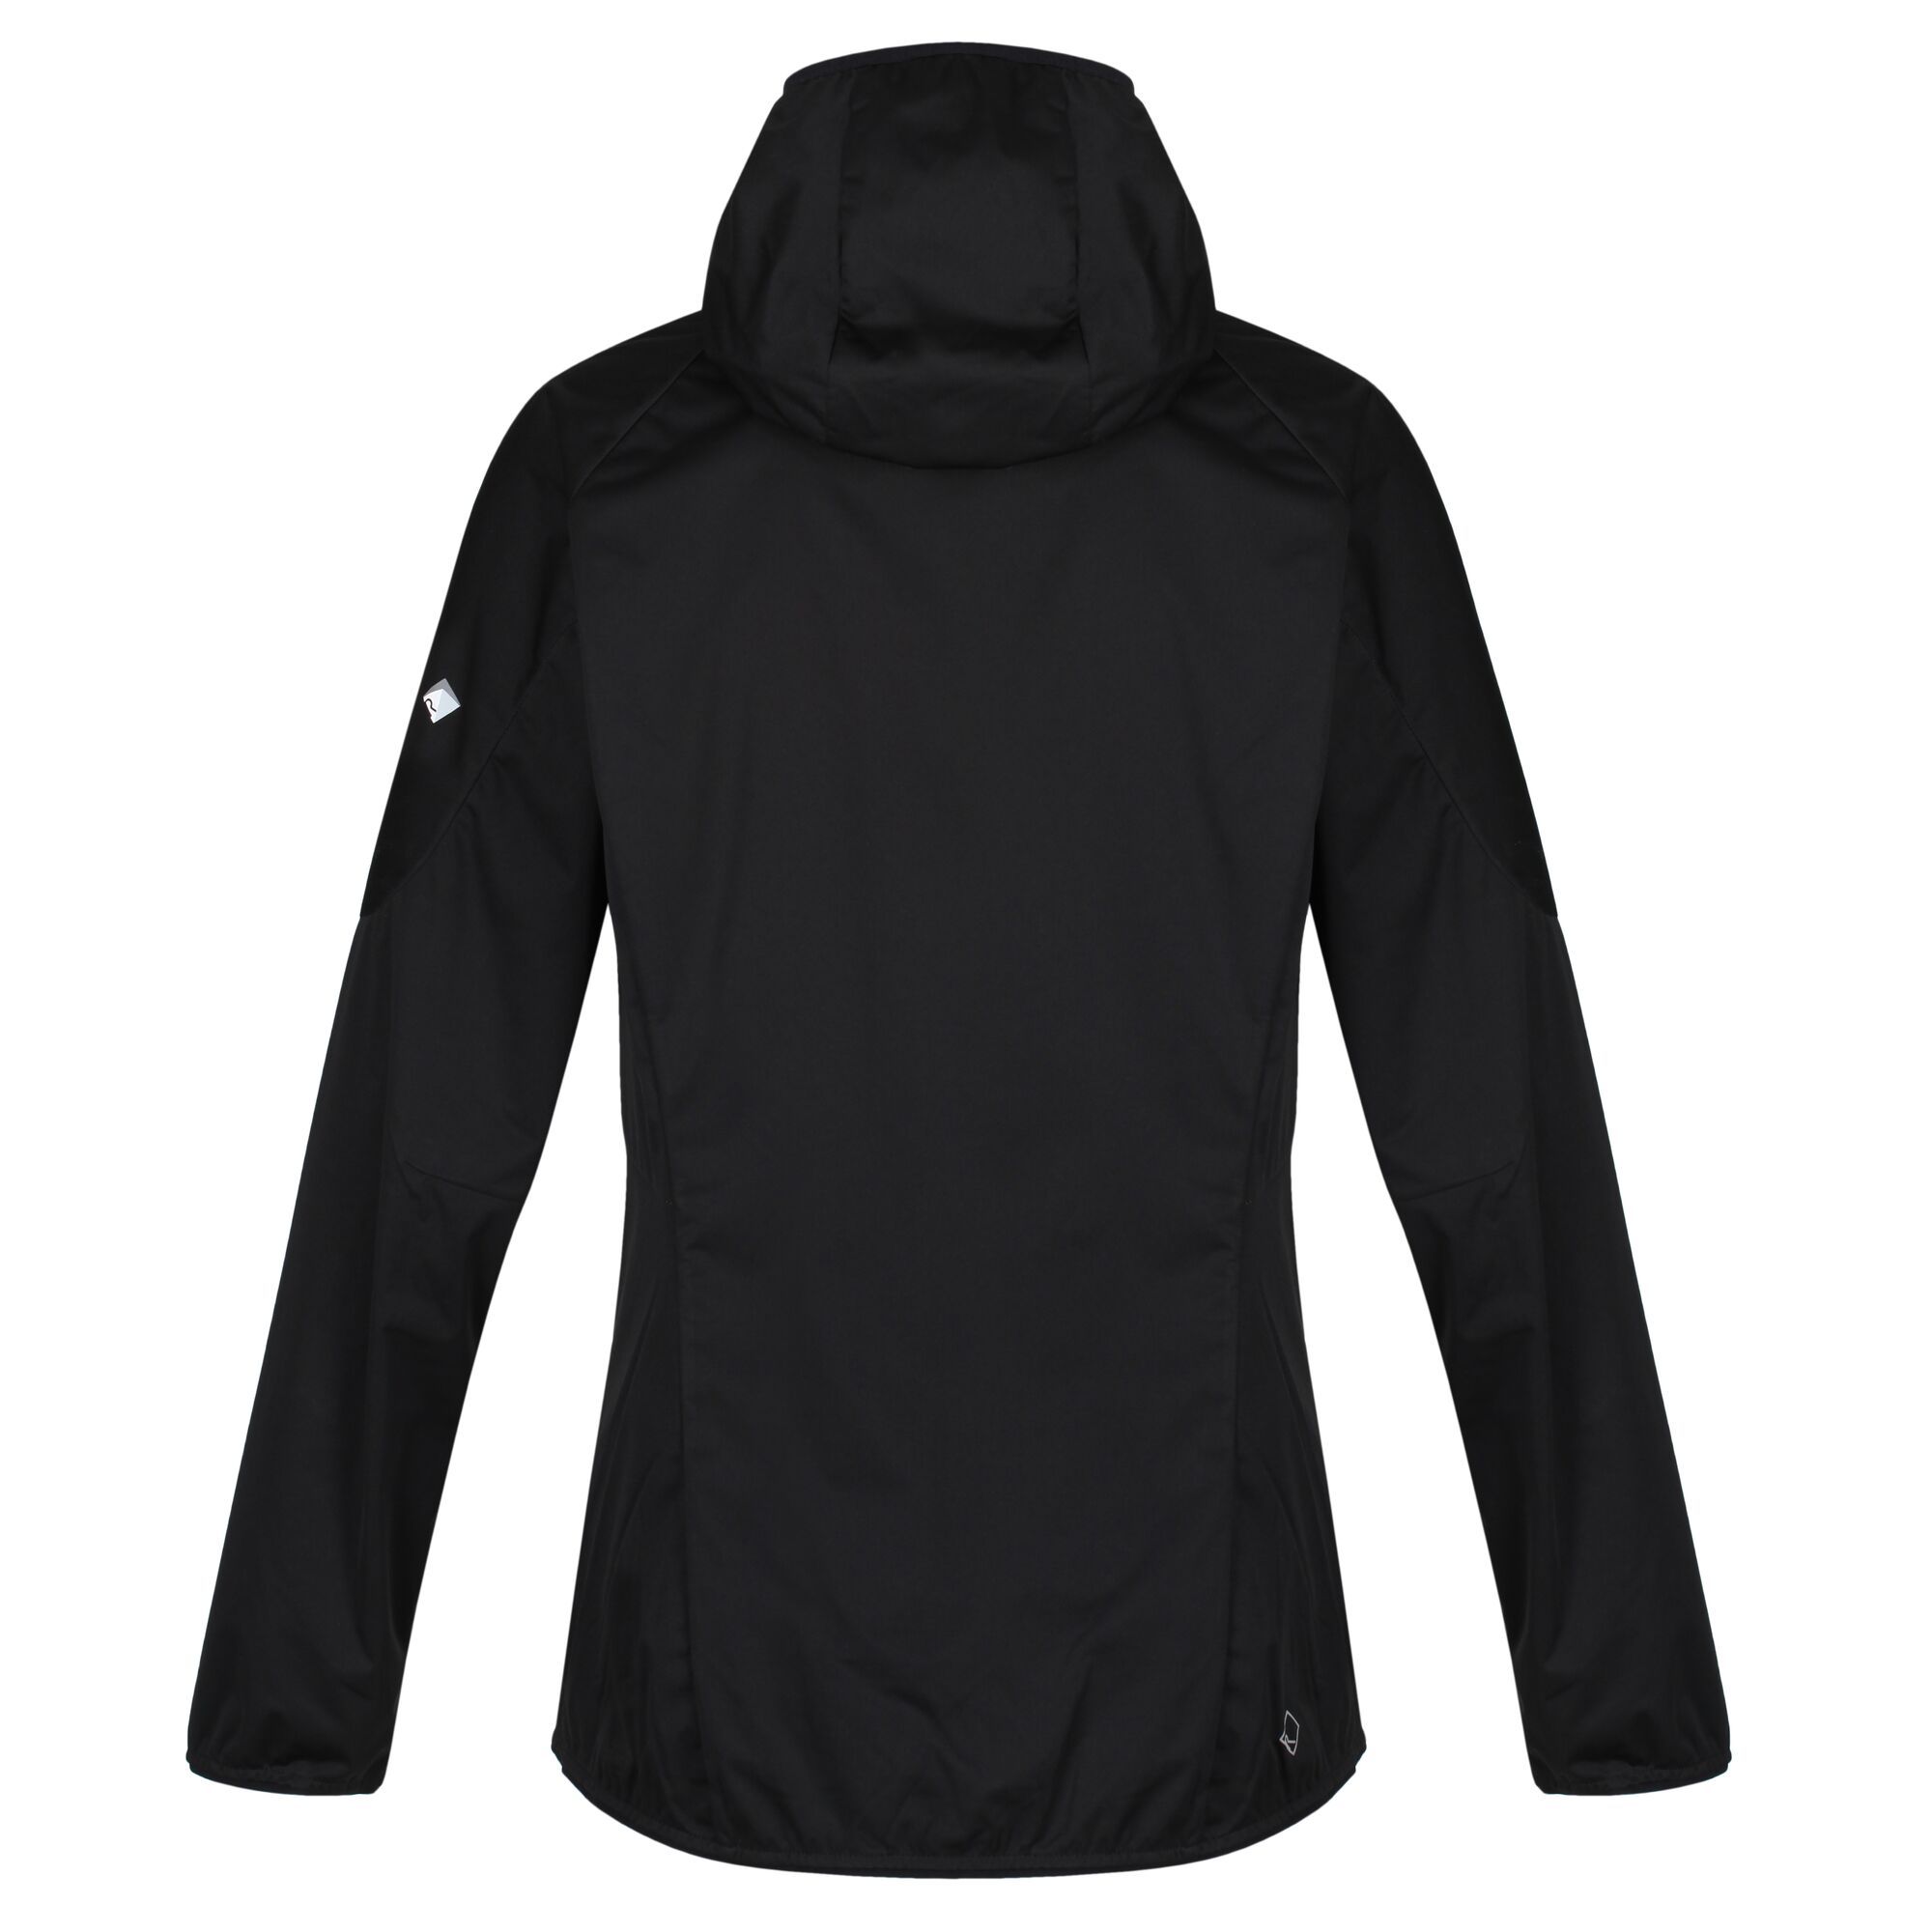 Material: 100% polyester. Waterproof and windproof membrane fabric. Durable water repellent finish. Grown on hood. Inner zip guard. Articulated sleeves for enhanced range of movement. 2 zipped lower pockets. Mesh lined pockets for breathability. Stretch binding to hood opening, cuffs and hem.